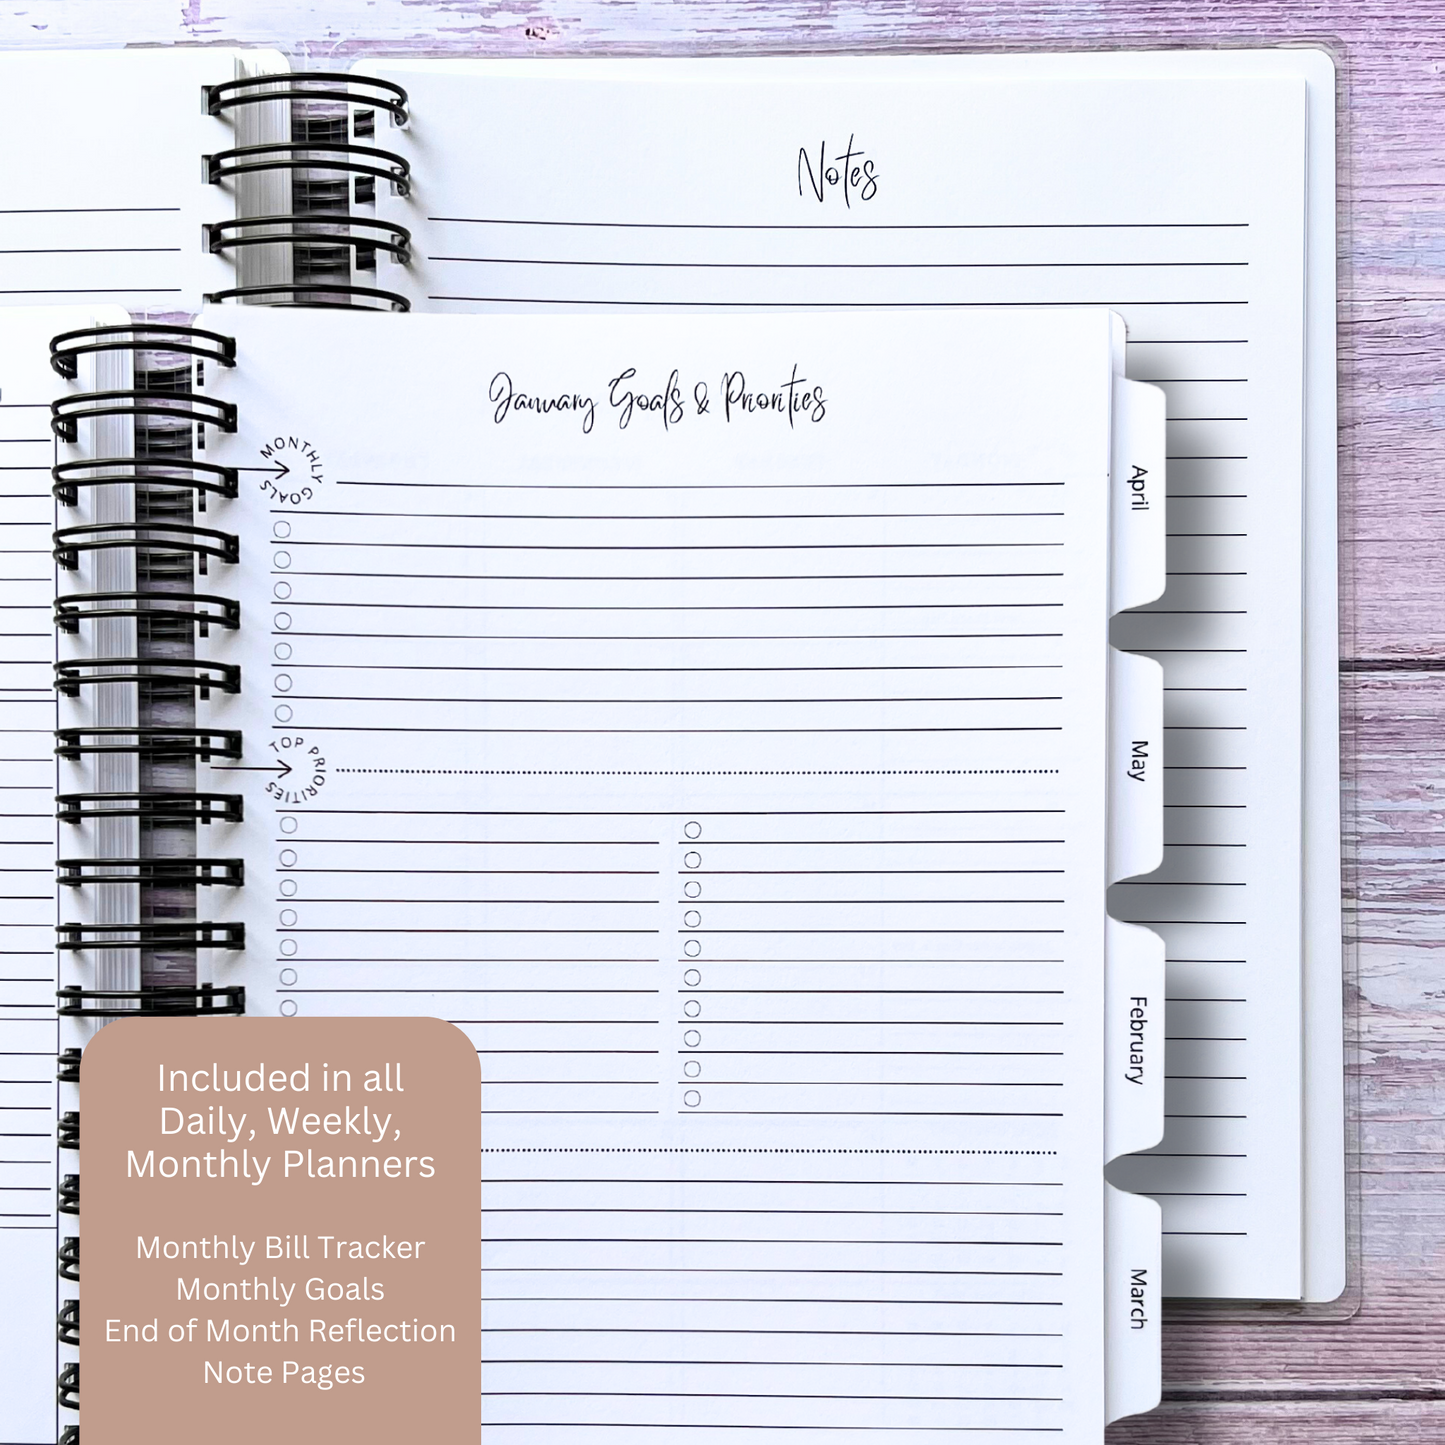 Personalized Monthly Planner - Whimsical Space